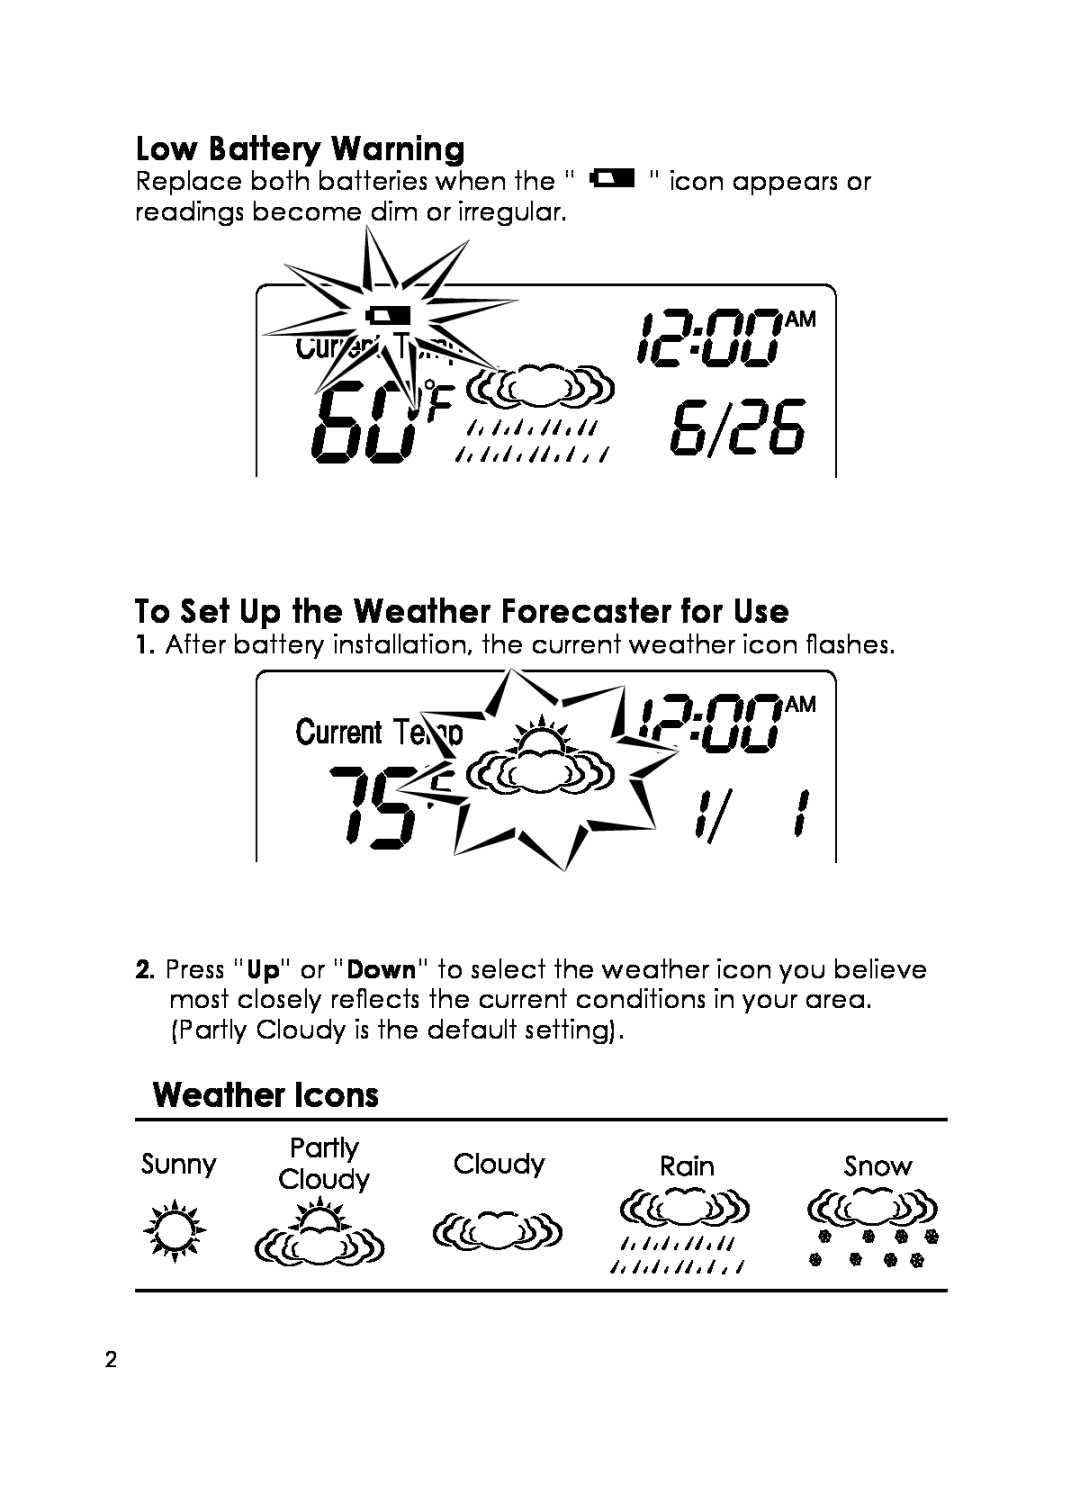 Taylor 1380 instruction manual Low Battery Warning, To Set Up the Weather Forecaster for Use 